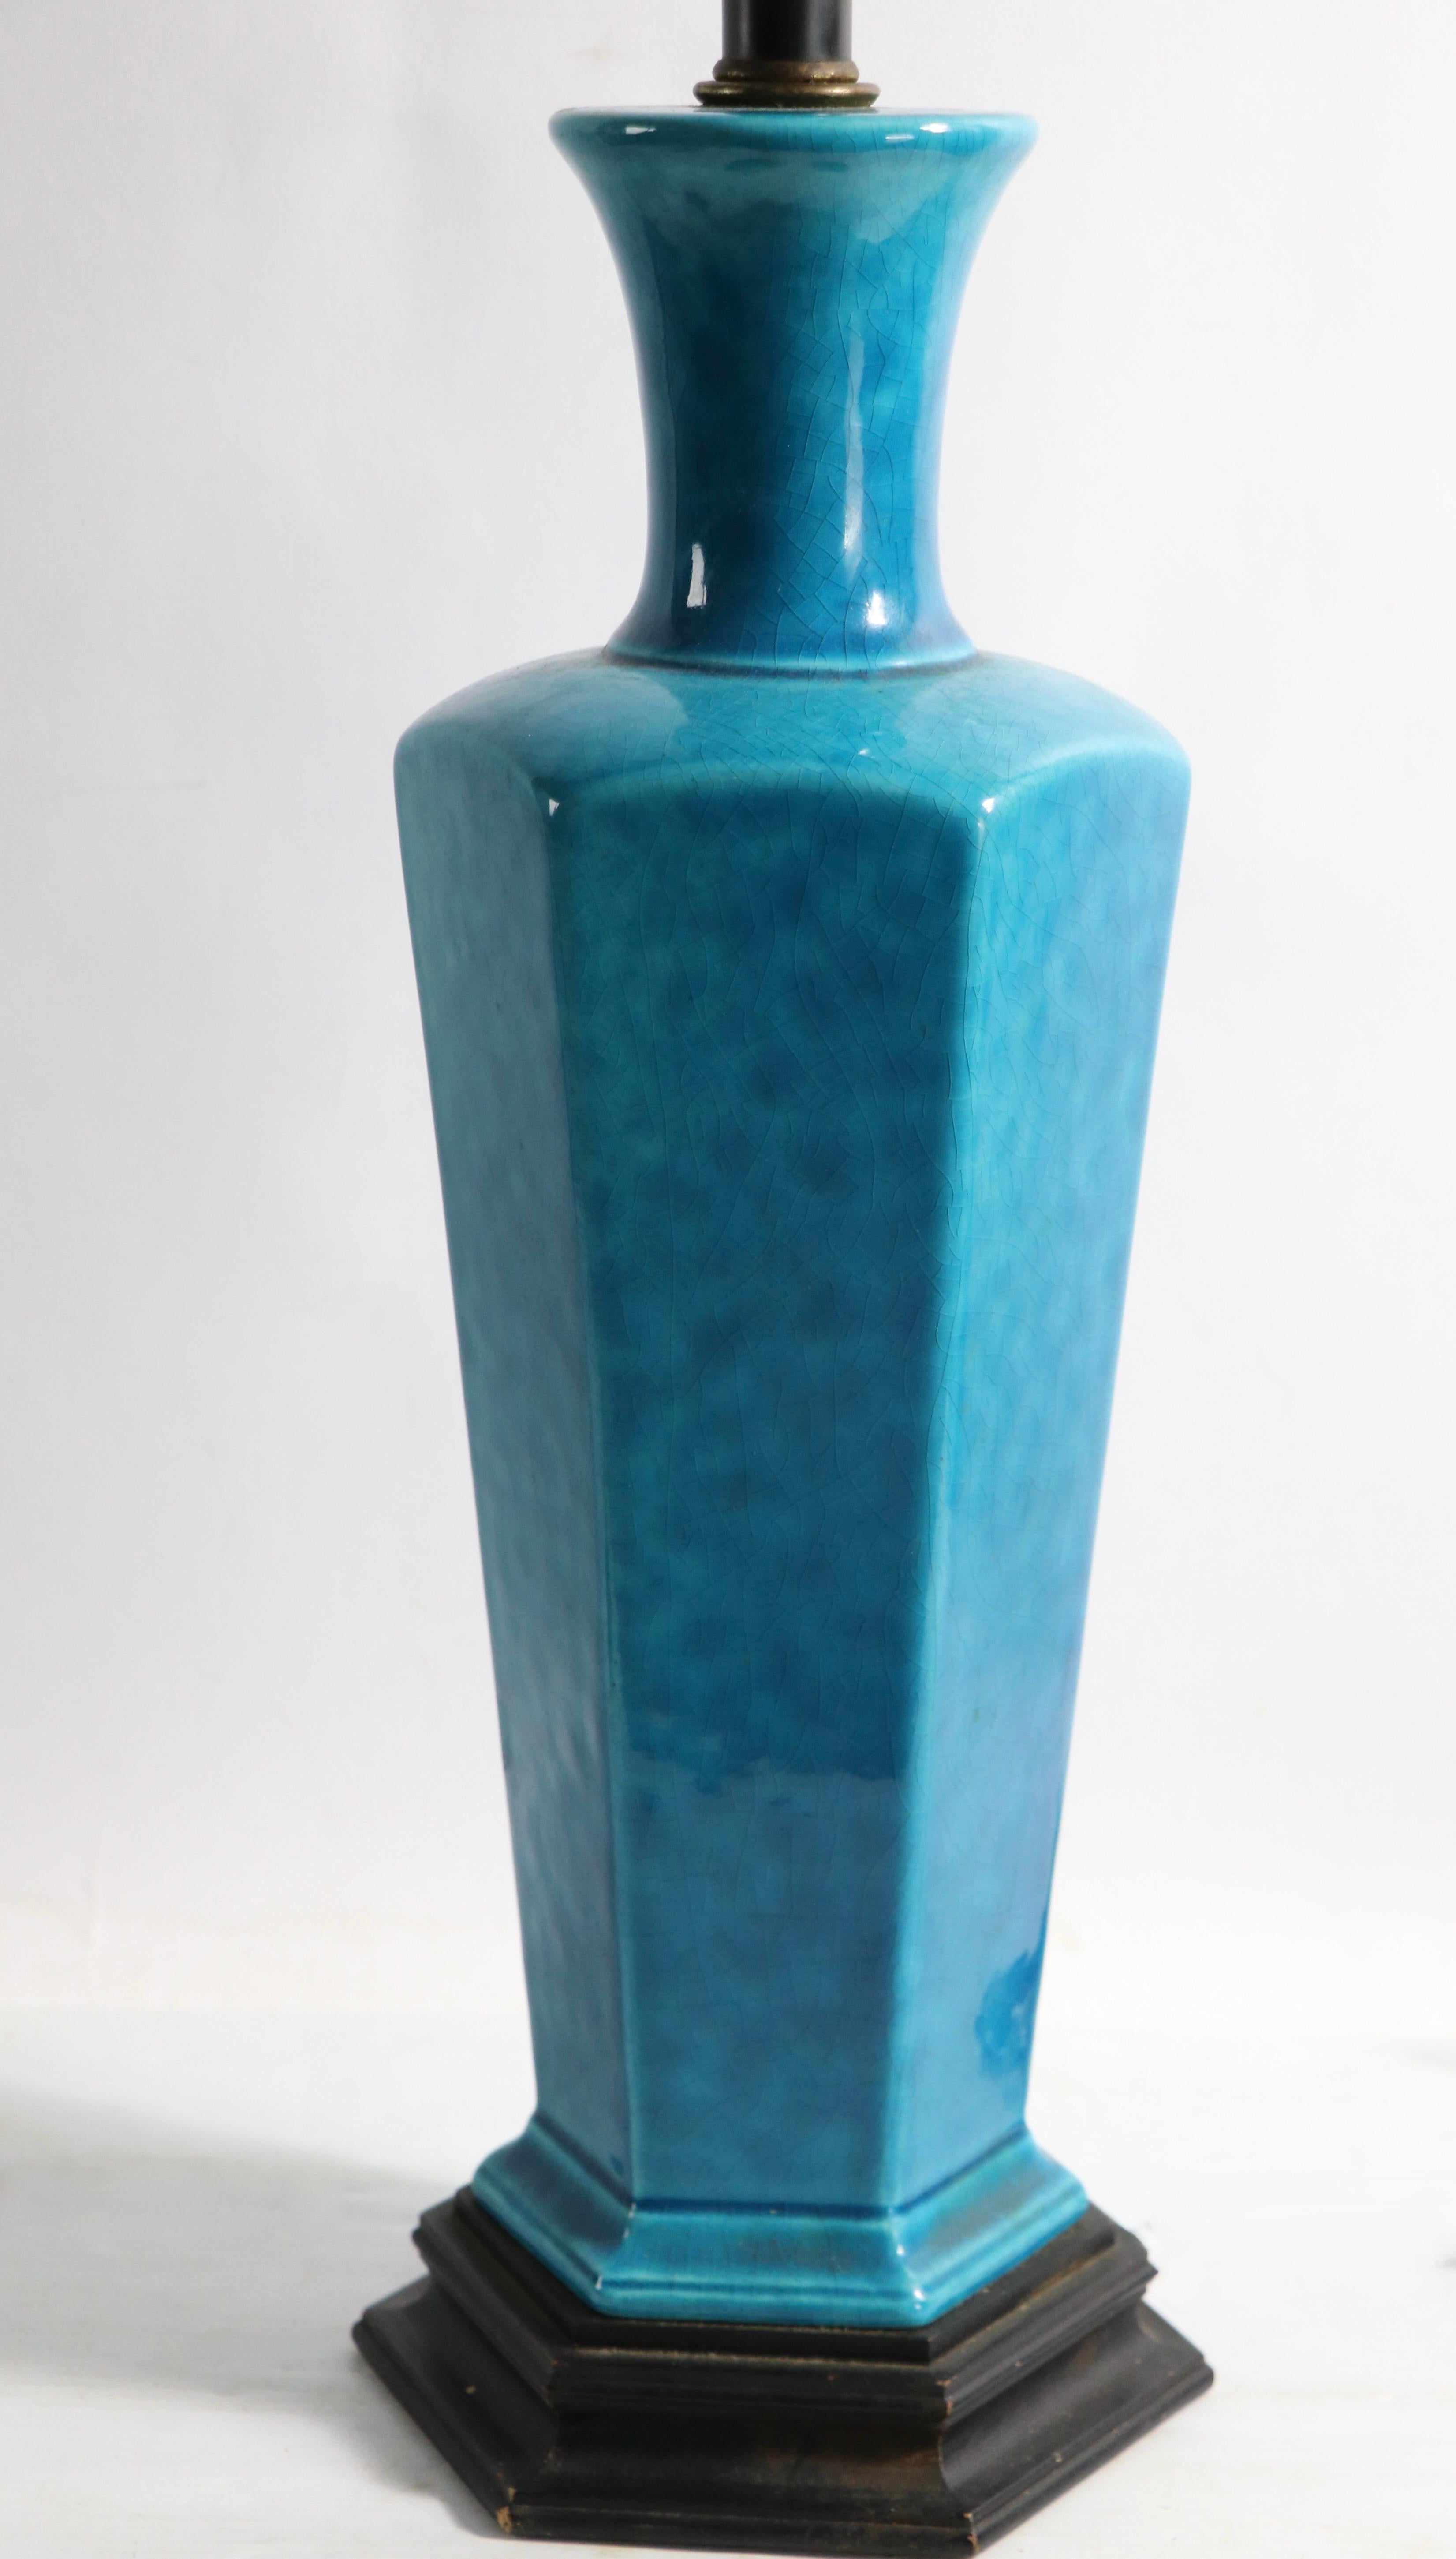 Stylish Chinese influence mid century table lamp in stunning blue glaze, on black painted wood base. The lamp is in very good, clean, working condition, shade not included.
 Measures: Total H 34 x H to top of ceramic base 19 x 7 Wx 6 D inches.